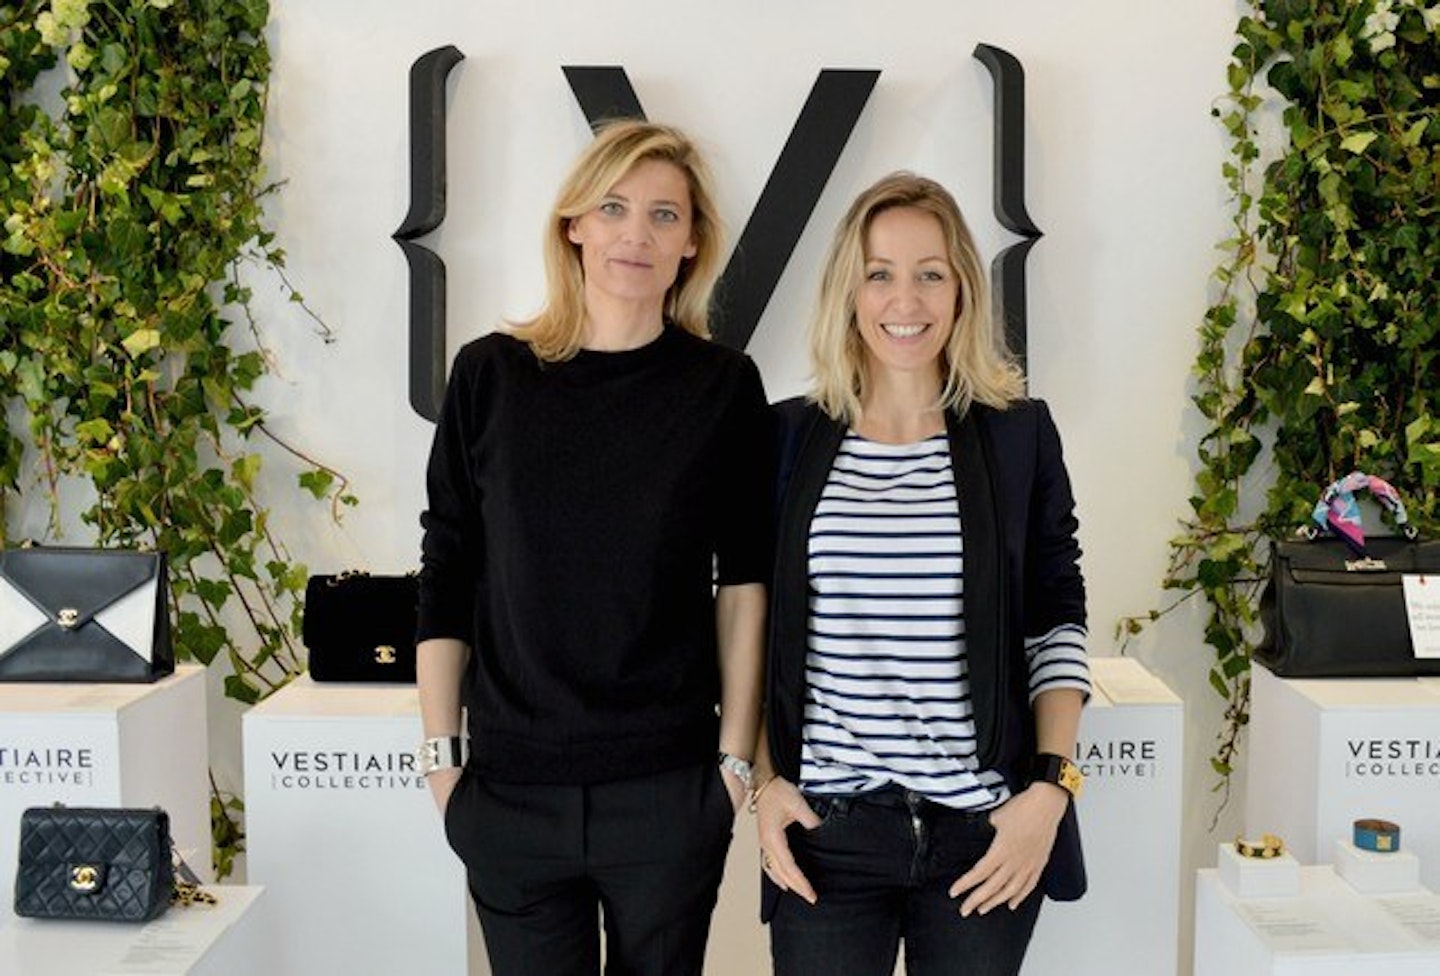 Sophie Hersan & Fanny Moizant of Vestiaire Collective